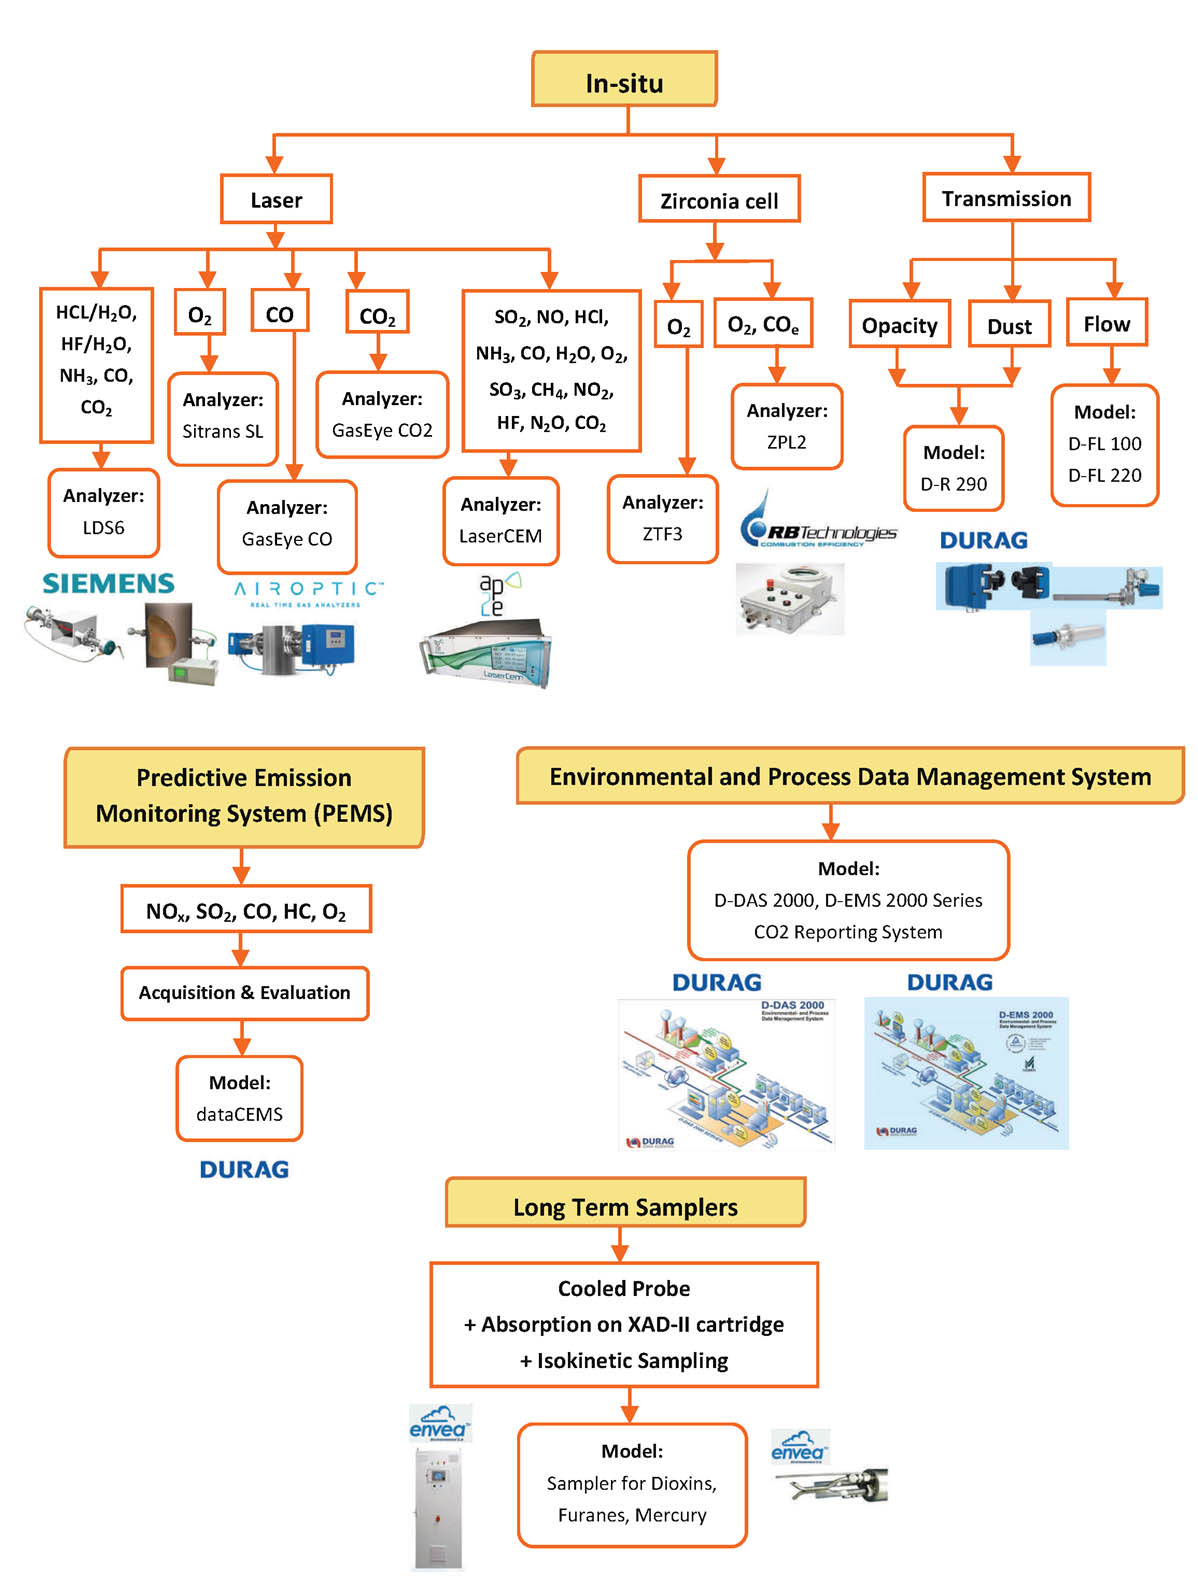 Continuous Emission Monitoring System (CEMS)